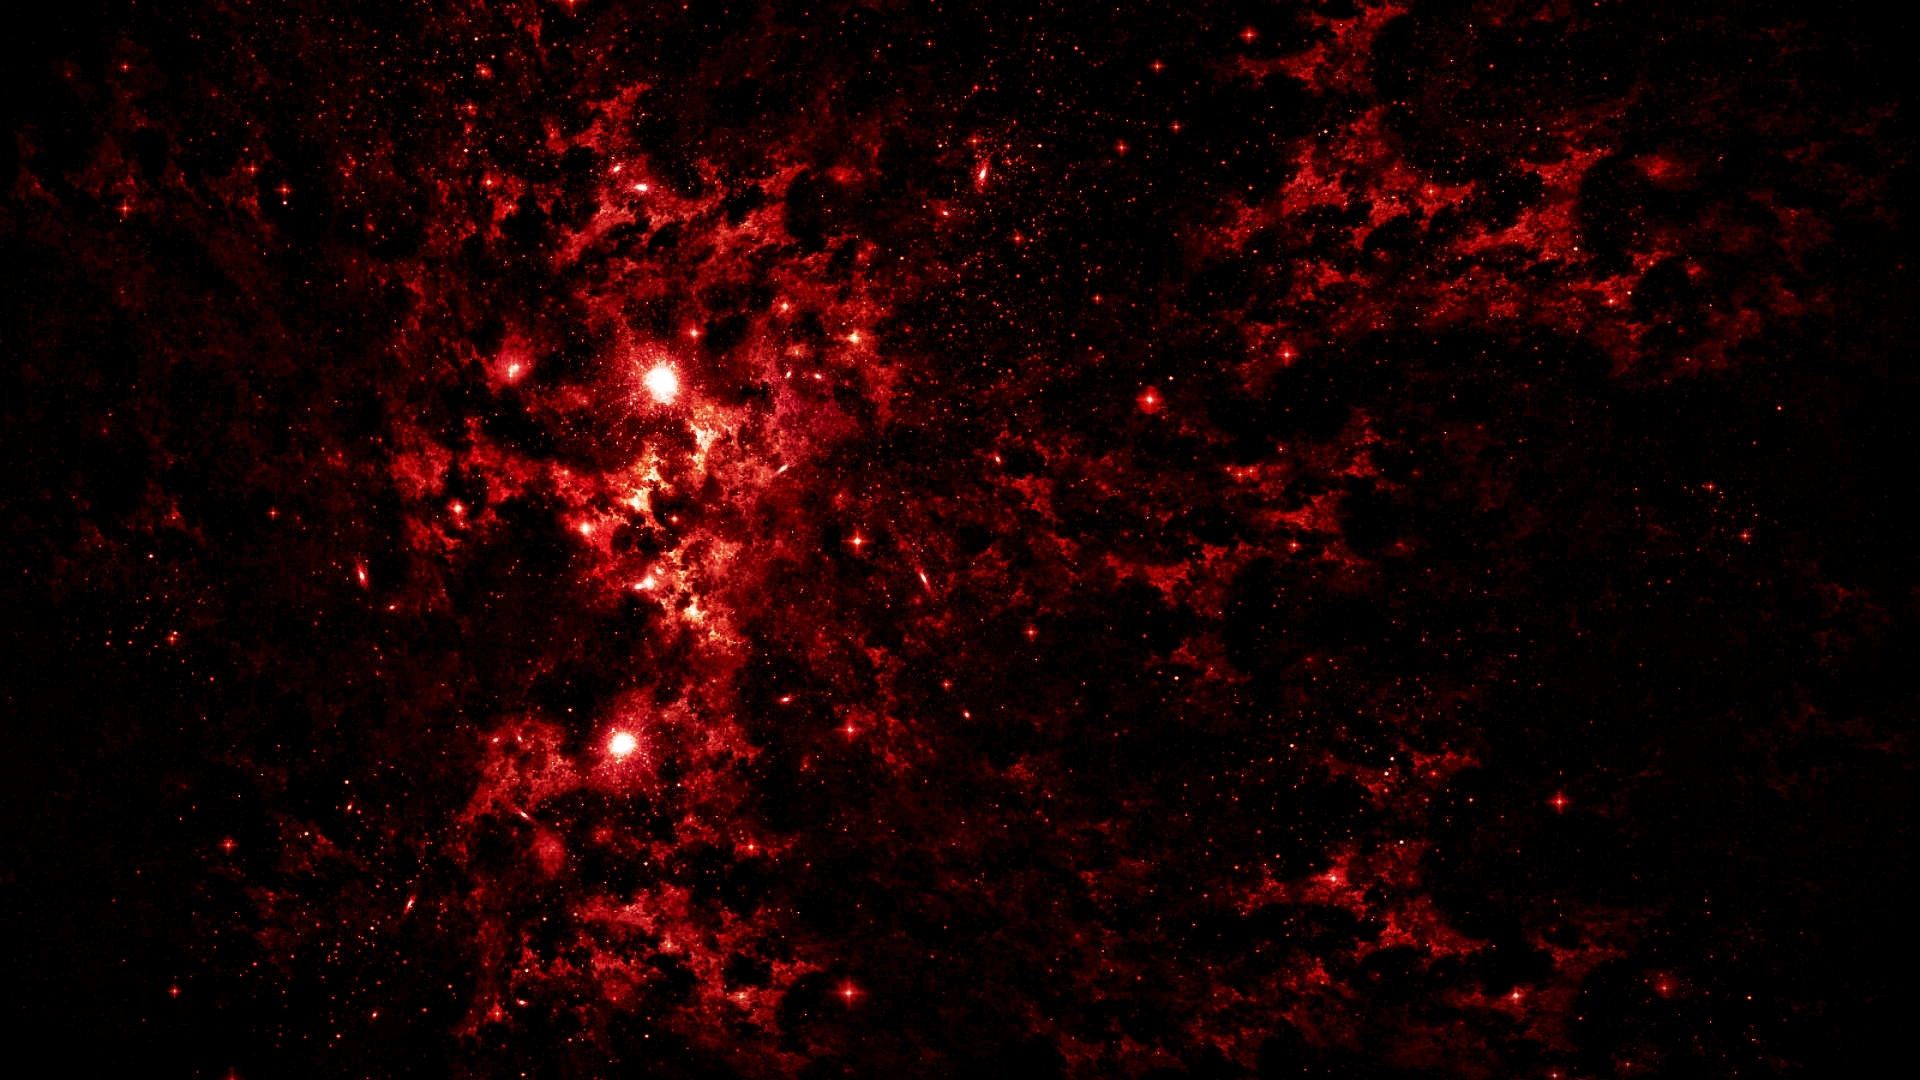 Cluster of red stars wallpapers and images - wallpapers ...